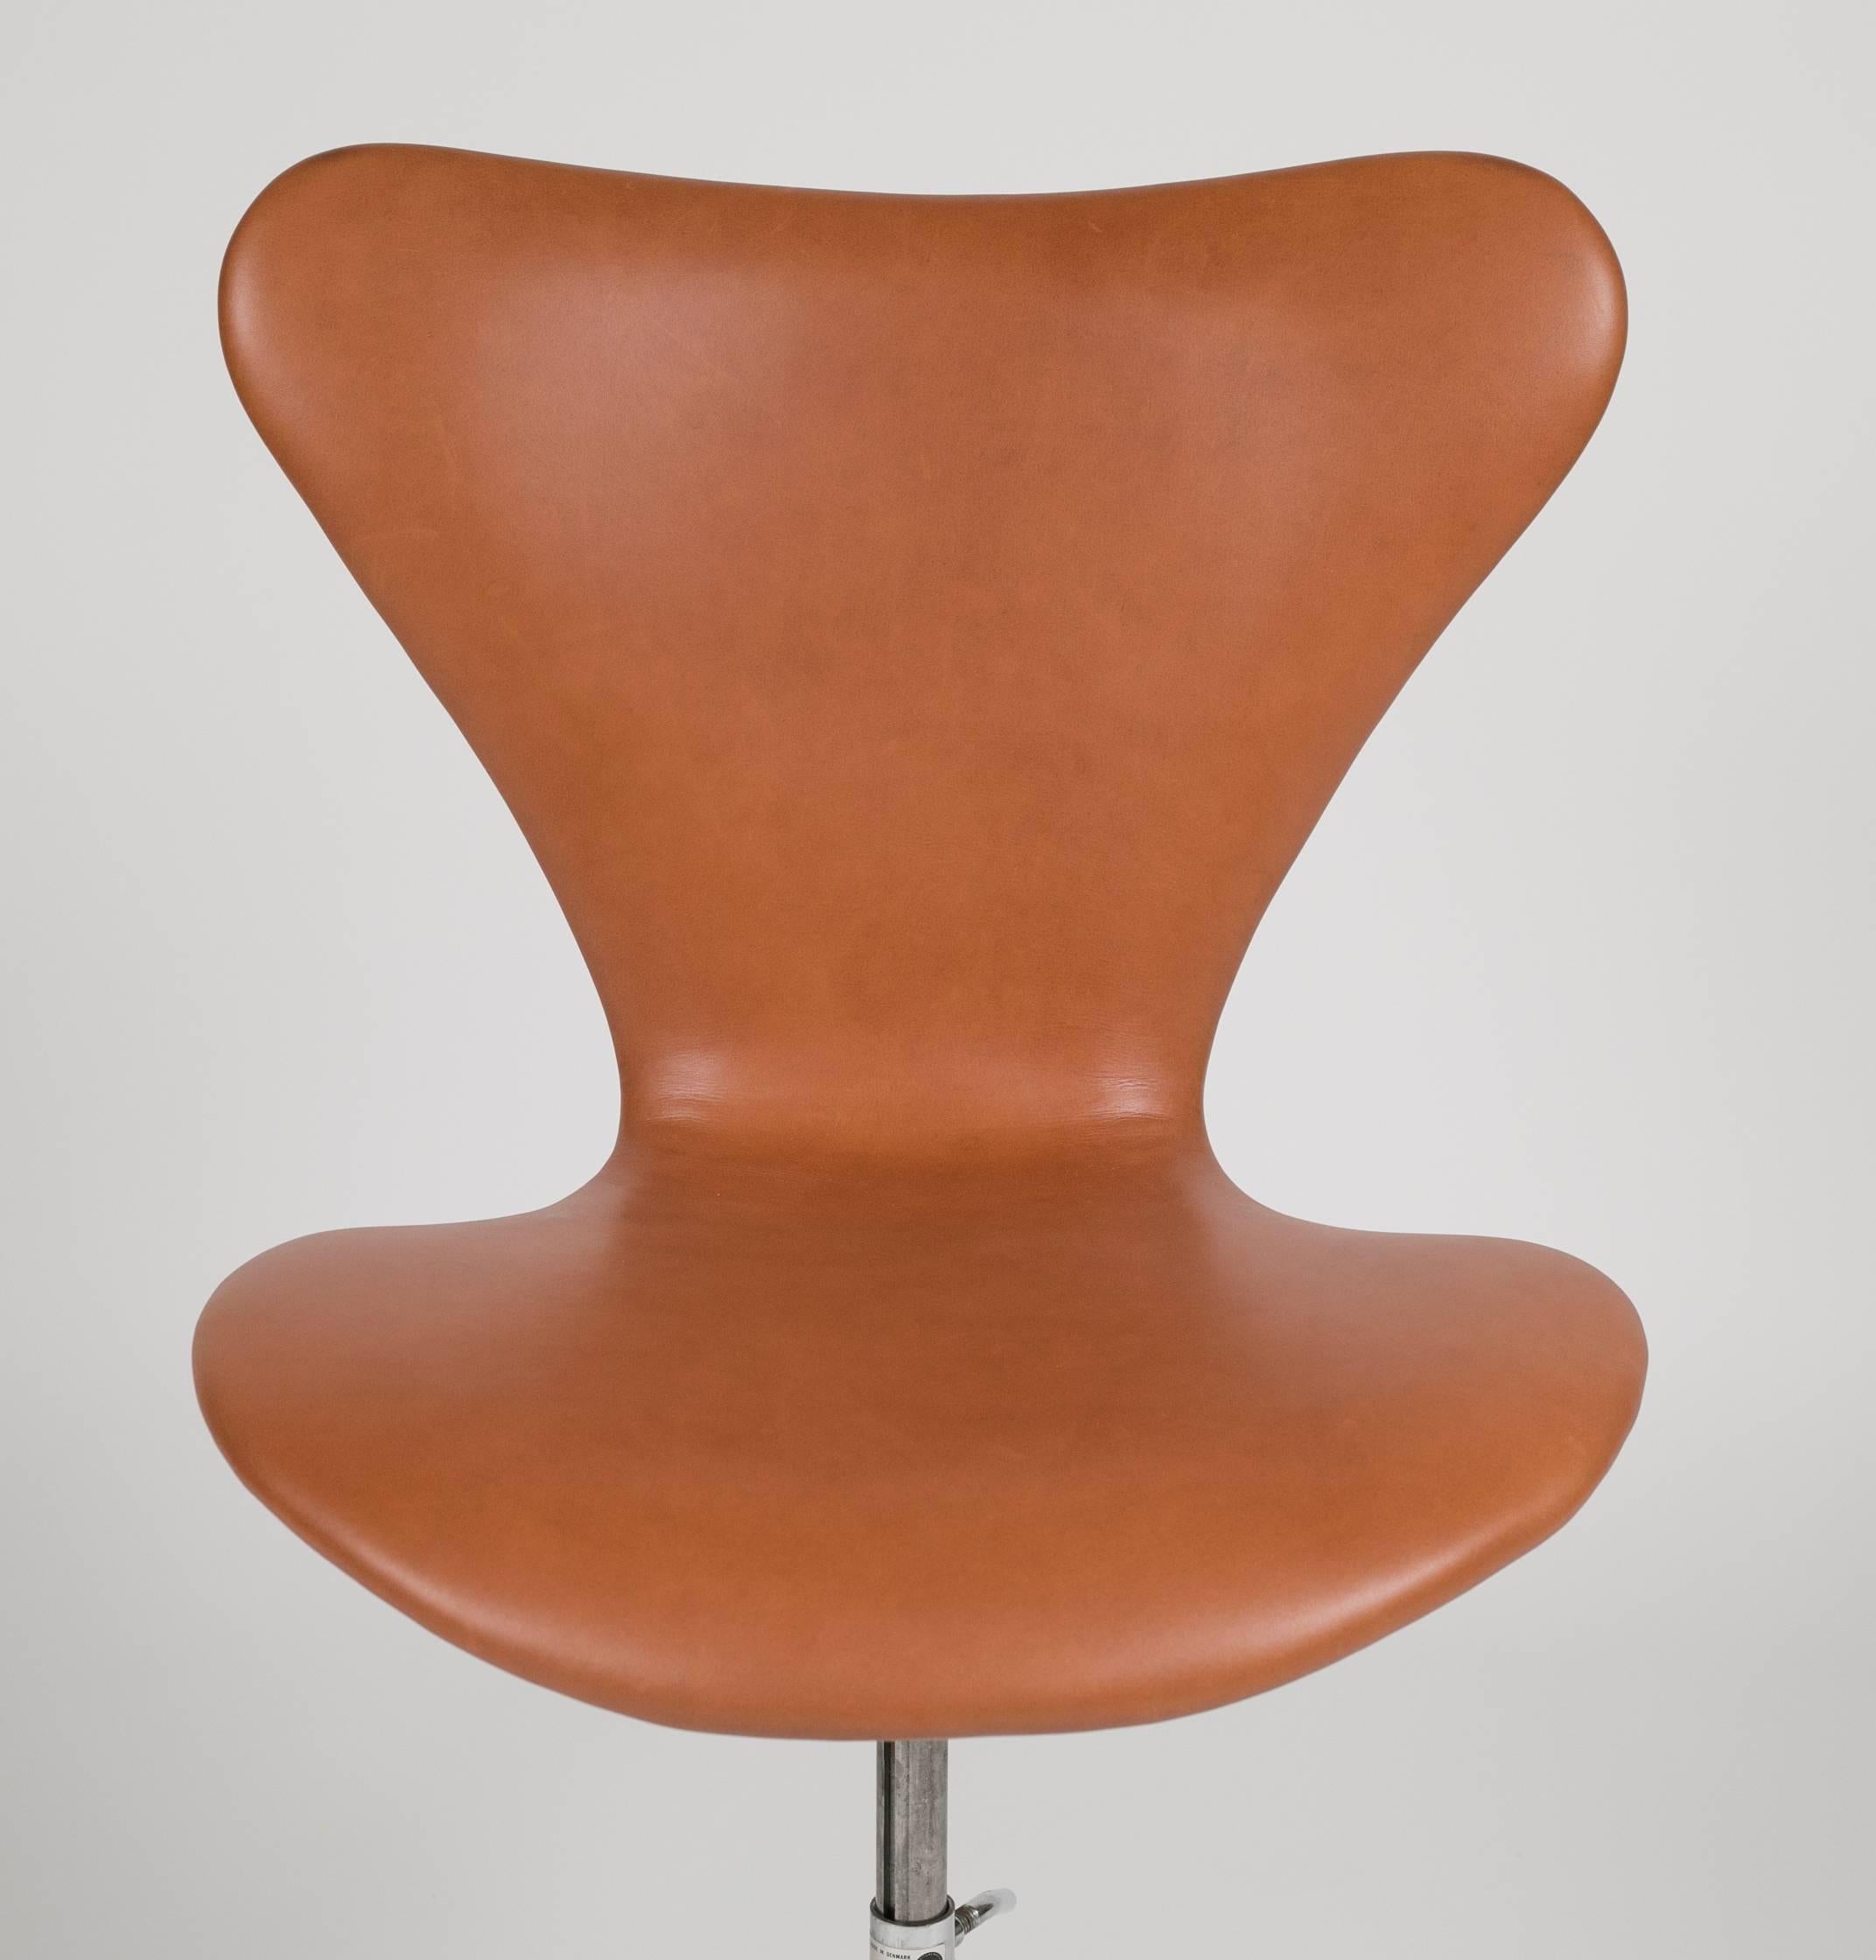 A swivel desk chair by Arne Jacobsen upholstered in natural Sorensen leather. This chair is model 3117, designed by Arne Jacobsen for Fritz Hansen. Marked on metal base and under seat.